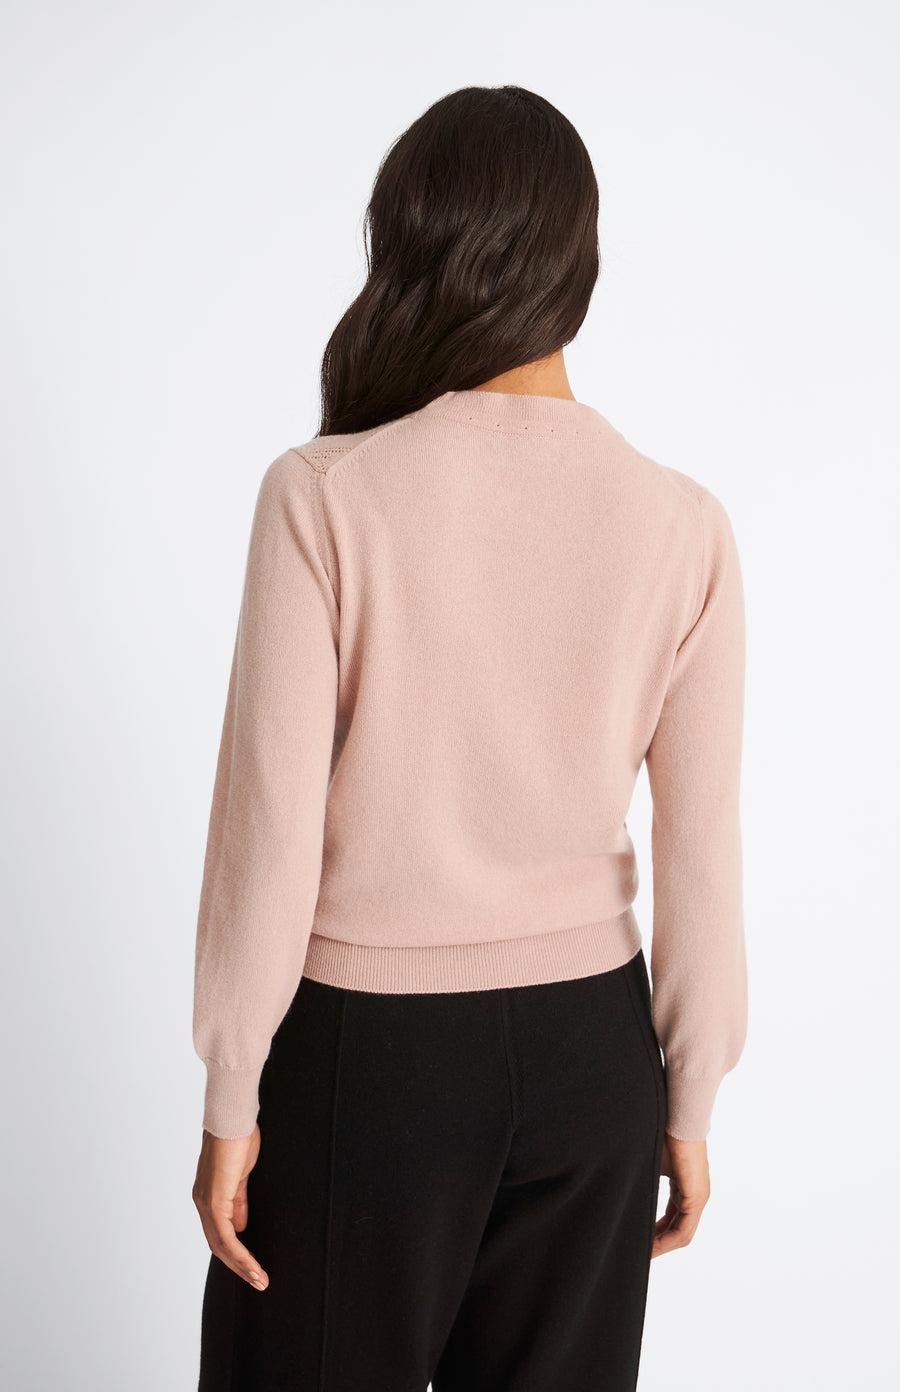 Pringle of Scotland Round Neck Pointelle Argyle Cashmere Jumper in Dusty Pink rear view